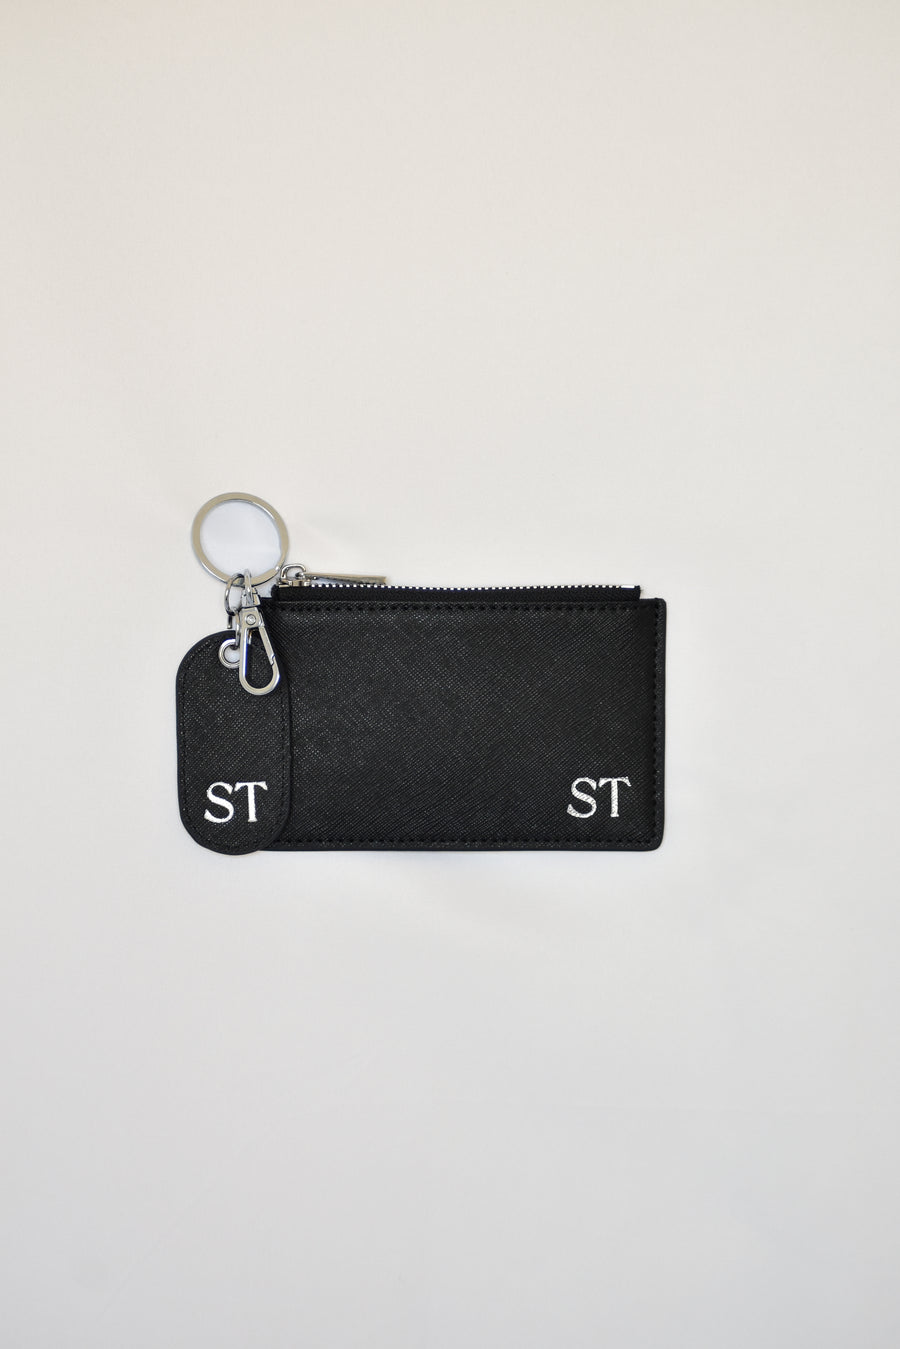 Personalised Leather Zipper Cardholder Wallet - Black with Silver Hardware